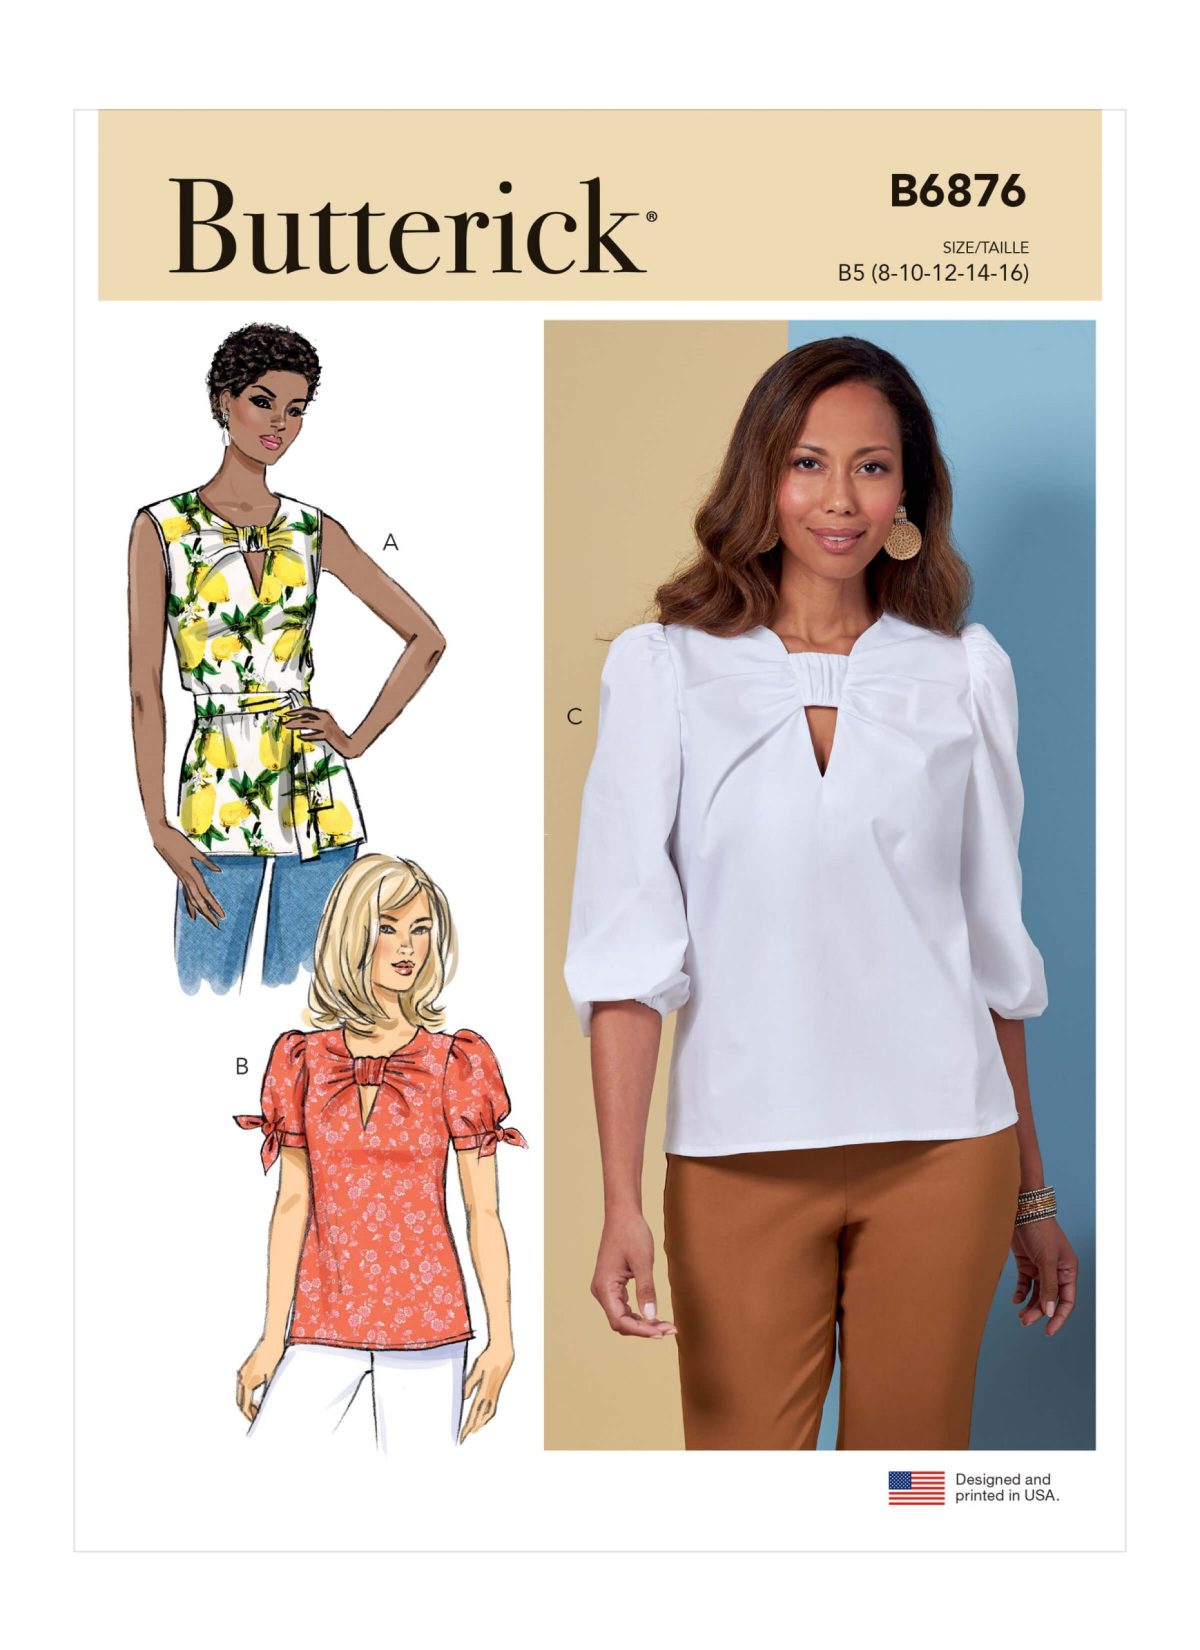 Butterick Sewing Pattern B6876 Misses' Tunic with Sash and Top